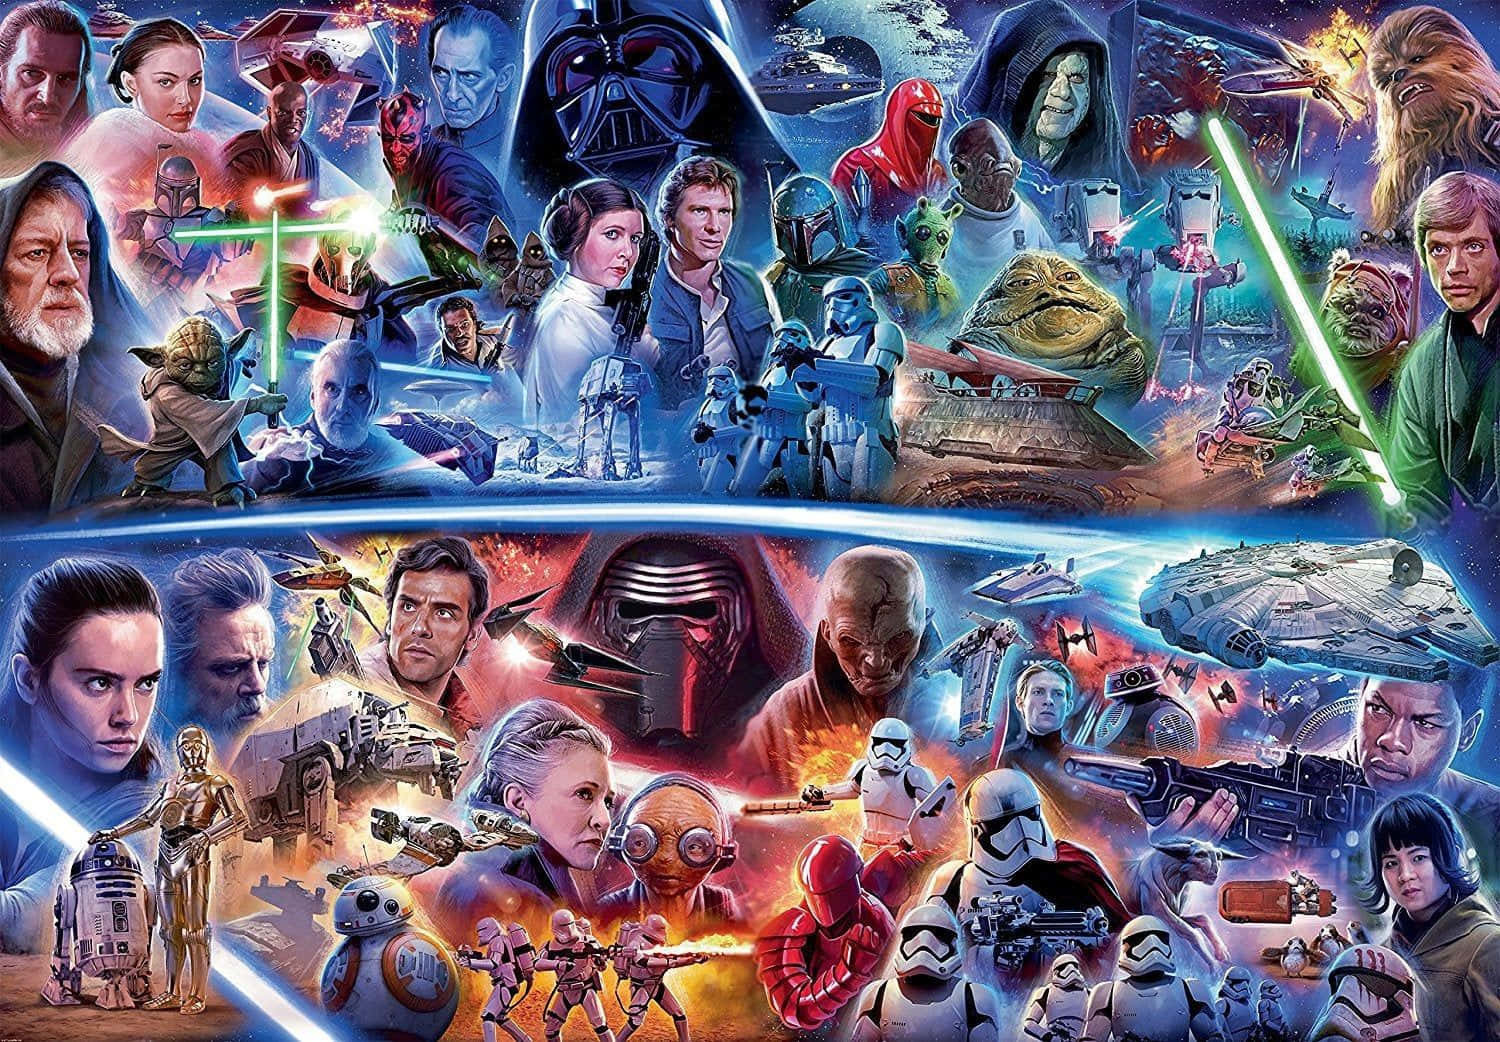 "A New Hope: A Confederate of the Star Wars Characters" Wallpaper